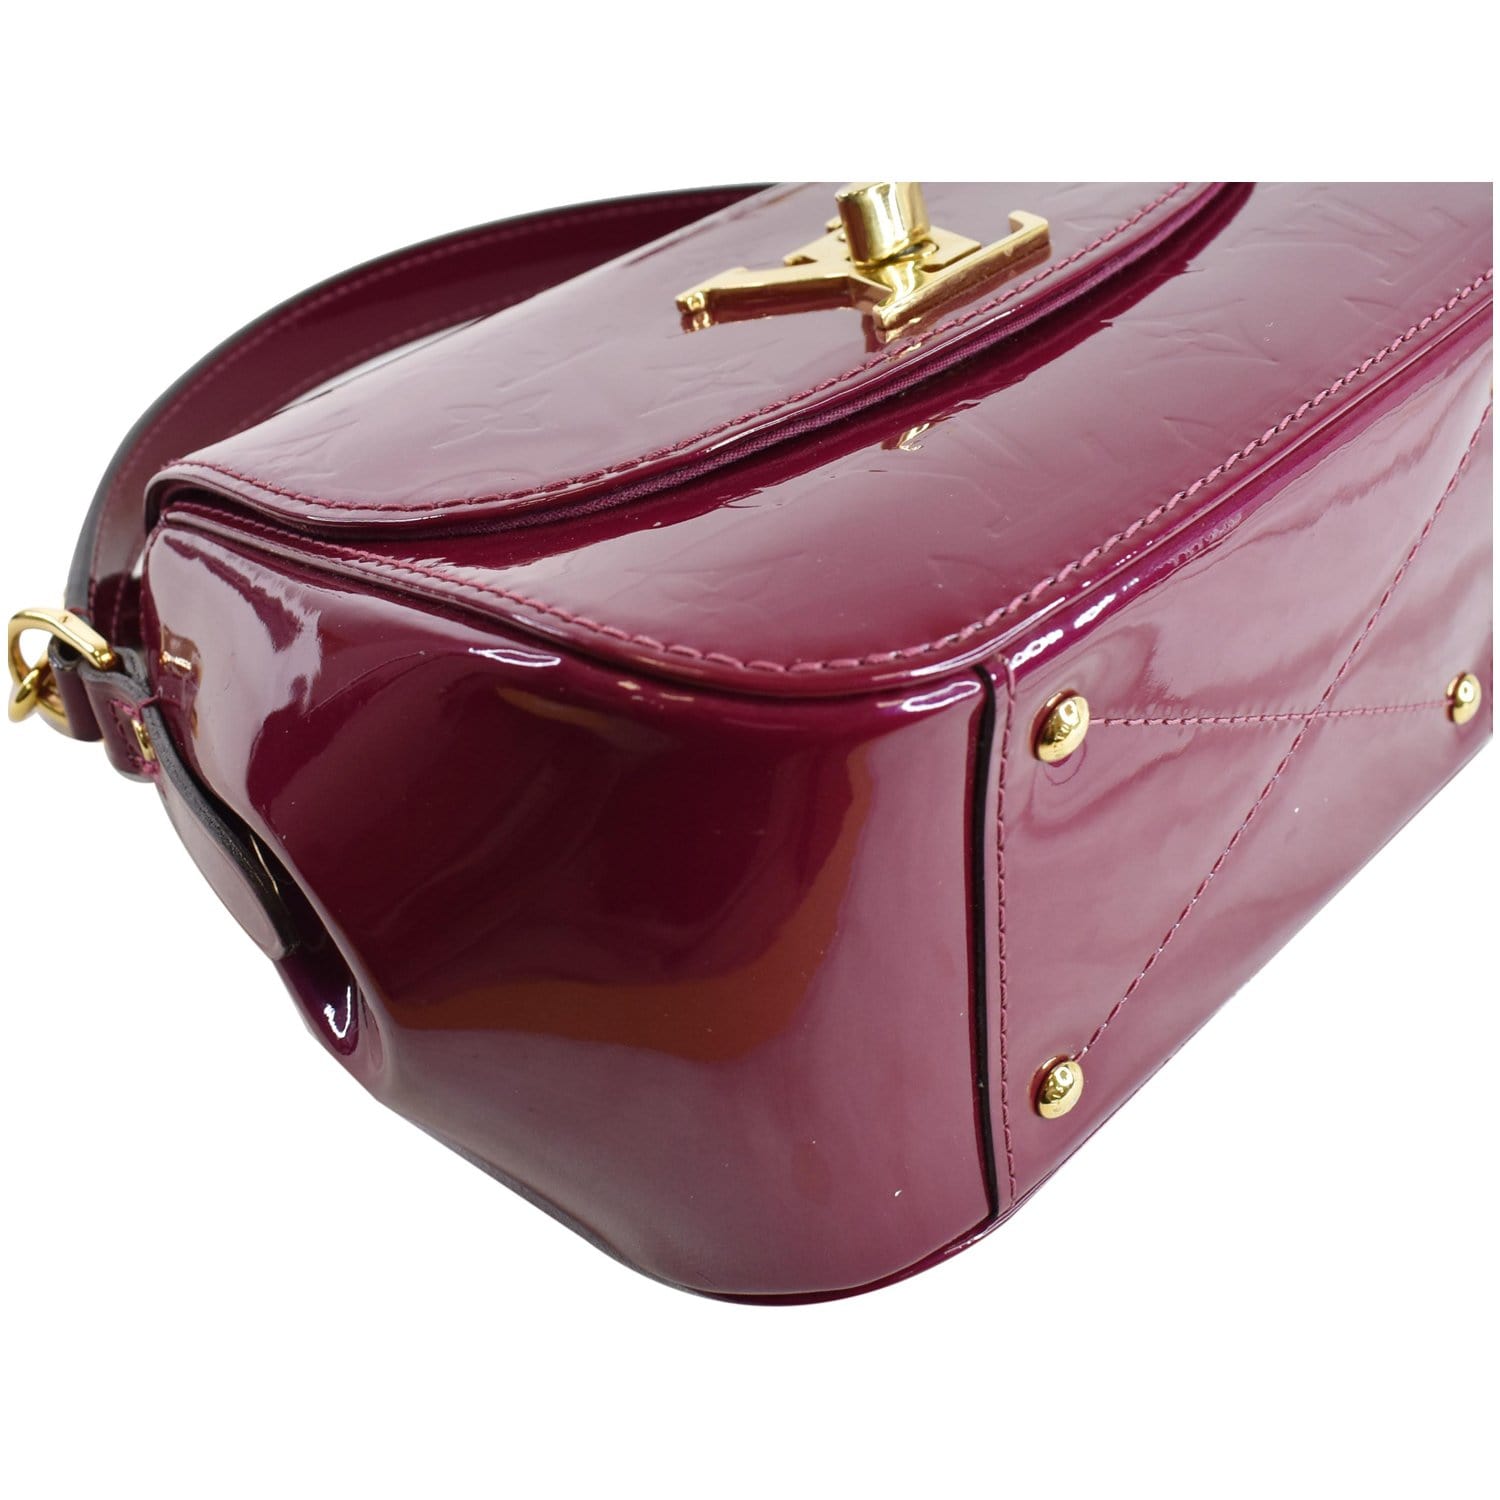 Louis Vuitton - Authenticated SOBE Clutch Bag - Patent Leather Burgundy Plain For Woman, Good condition